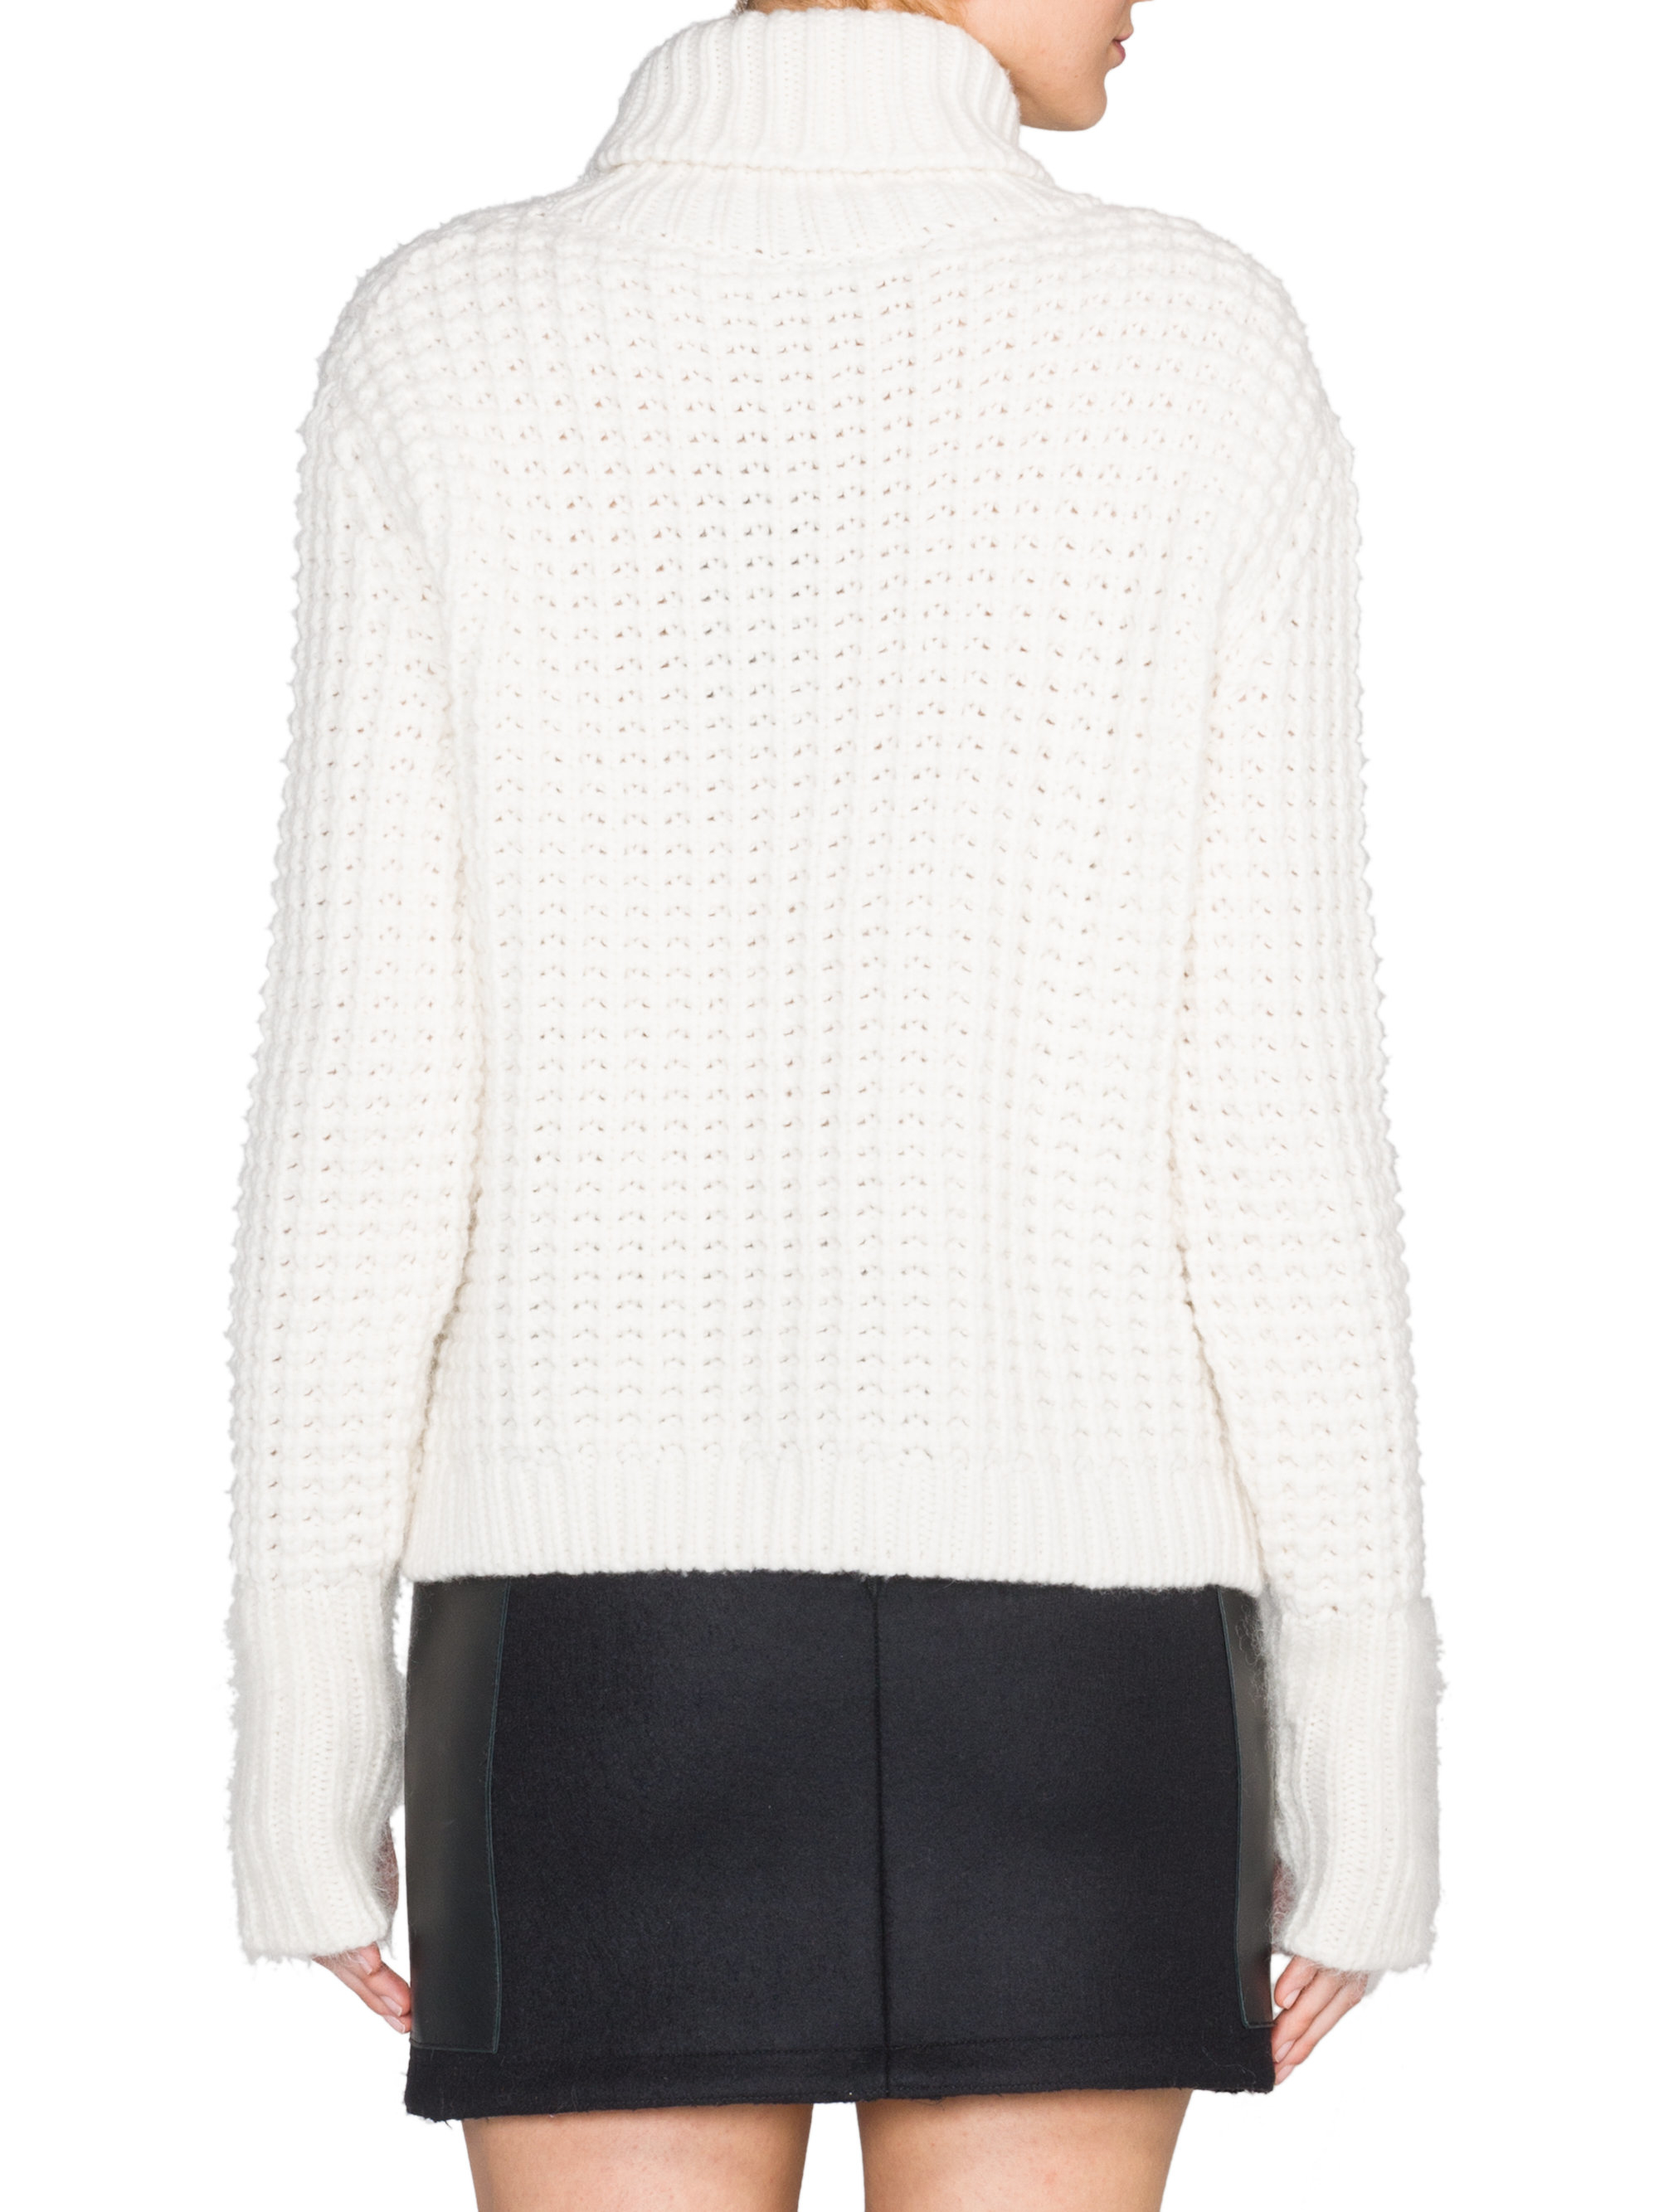 Lyst - Fendi Cashmere & Mohair Chunky Turtleneck Sweater in White